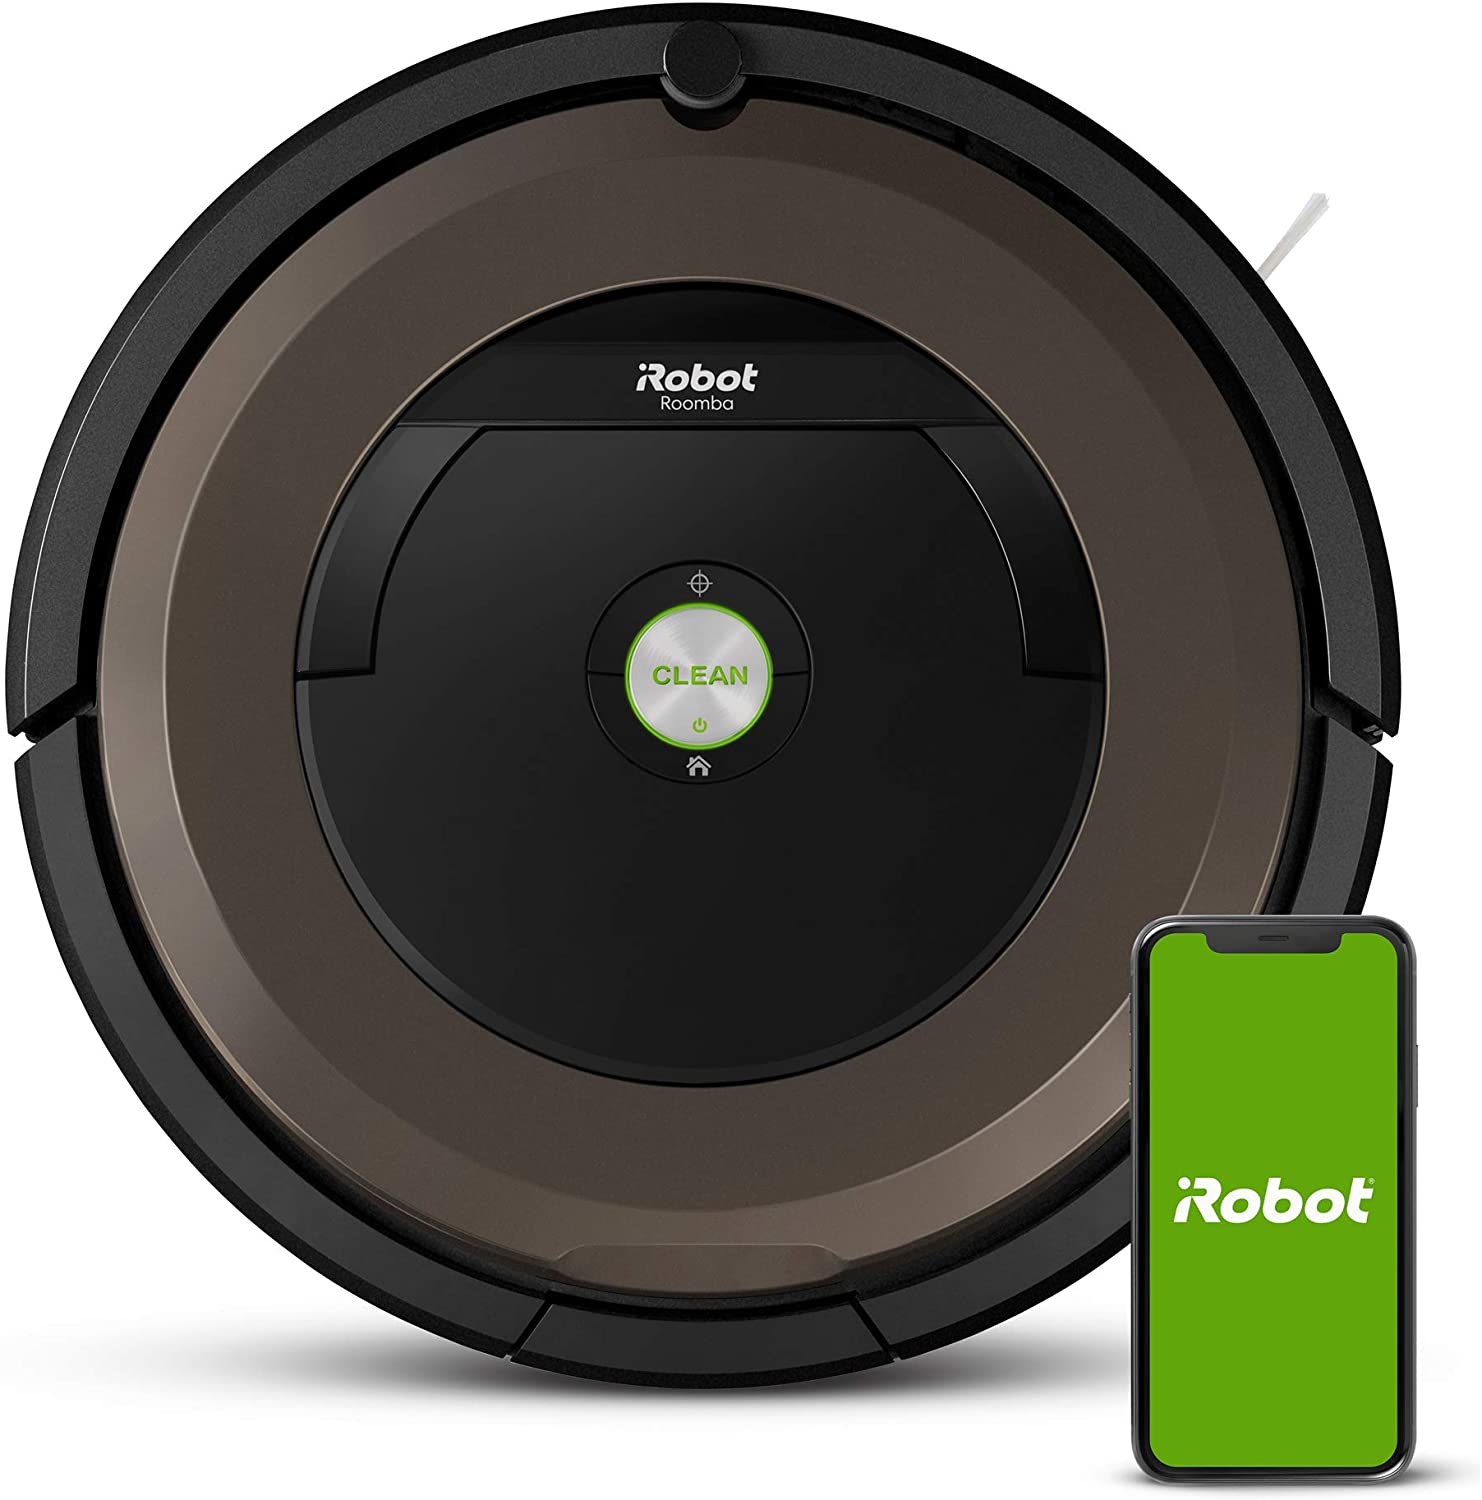 What are Robot vacuums, and which are the best brands?